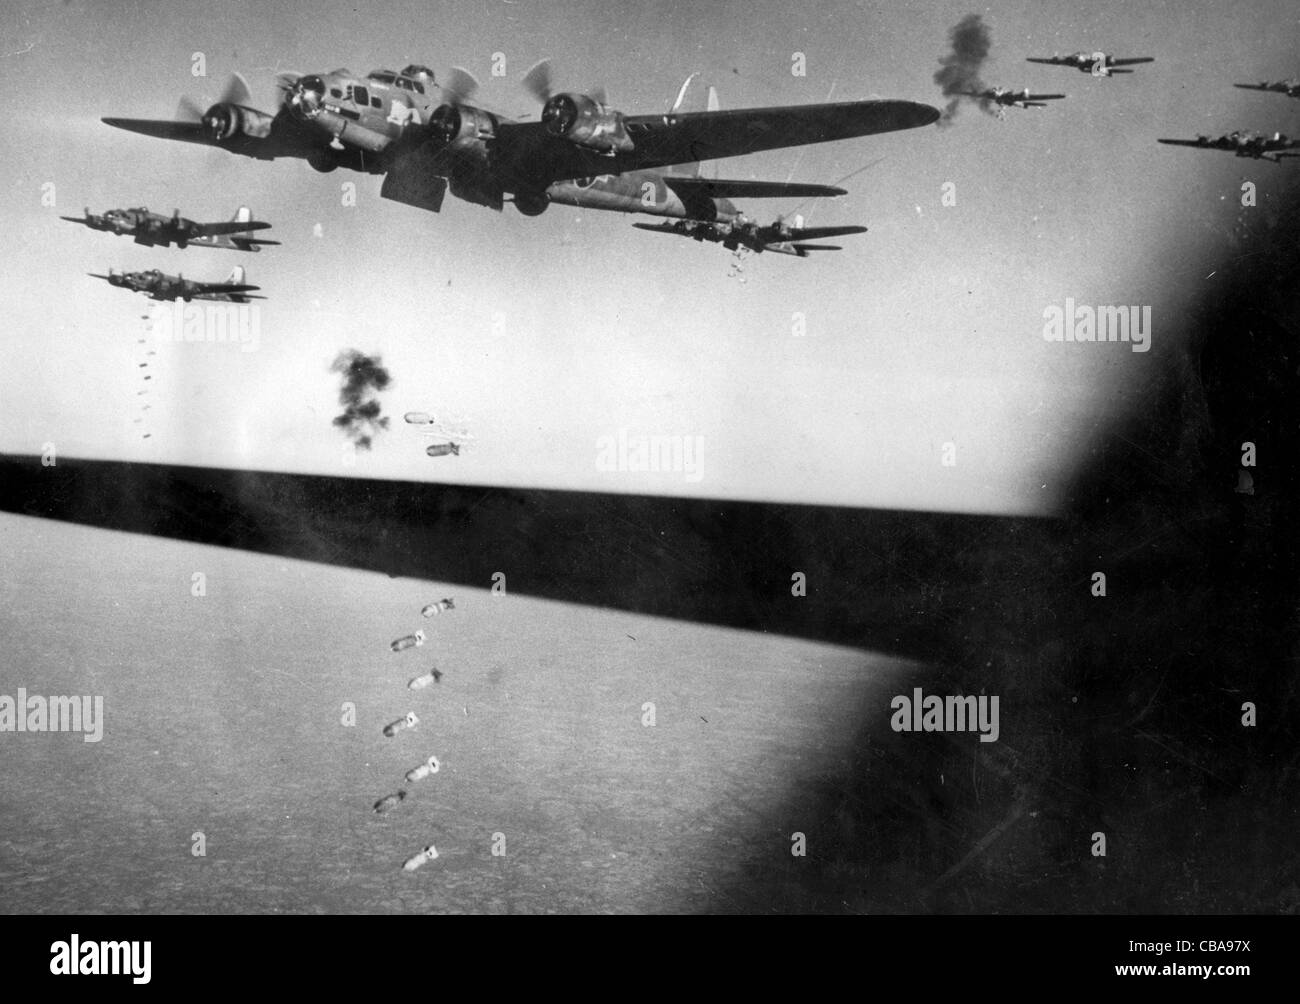 WW11 B17 Flying Fortress bomber s of the USAAF drop their bombs under flak bombardment Stock Photo